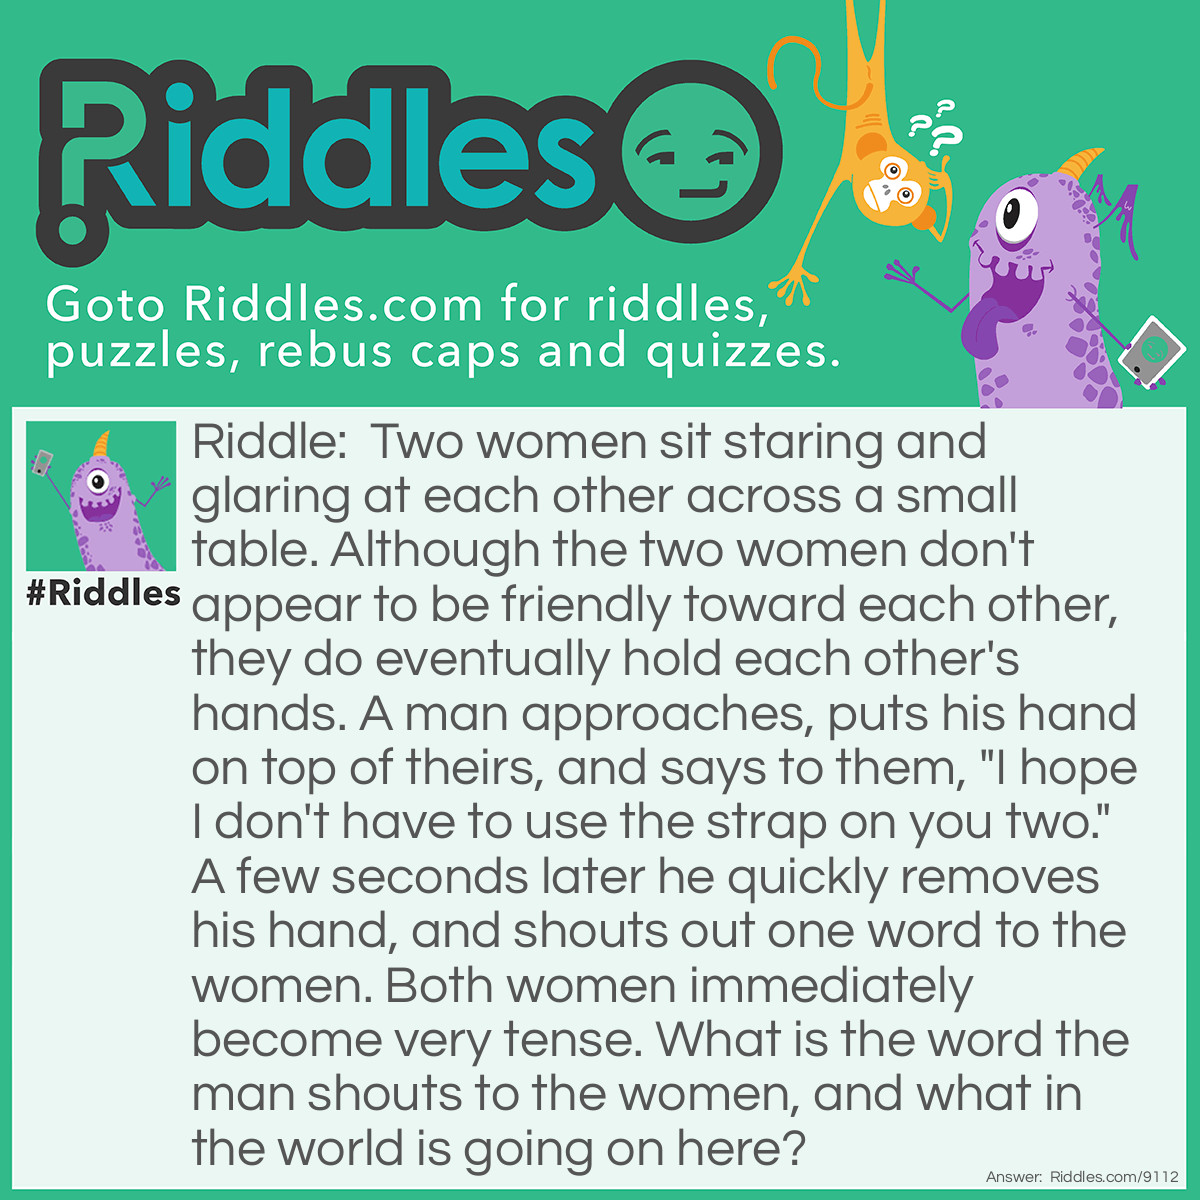 Riddle: Two women sit staring and glaring at each other across a small table. Although the two women don't appear to be friendly toward each other, they do eventually hold each other's hands. A man approaches, puts his hand on top of theirs, and says to them, "I hope I don't have to use the strap on you two." A few seconds later he quickly removes his hand, and shouts out one word to the women. Both women immediately become very tense. What is the word the man shouts to the women, and what in the world is going on here? Answer: The word the man shouts to the women is, "Go!" This is the way most women's arm wrestling competitions start, and hopefully the wrist straps, to keep their hands from slipping apart, won't have to be used.